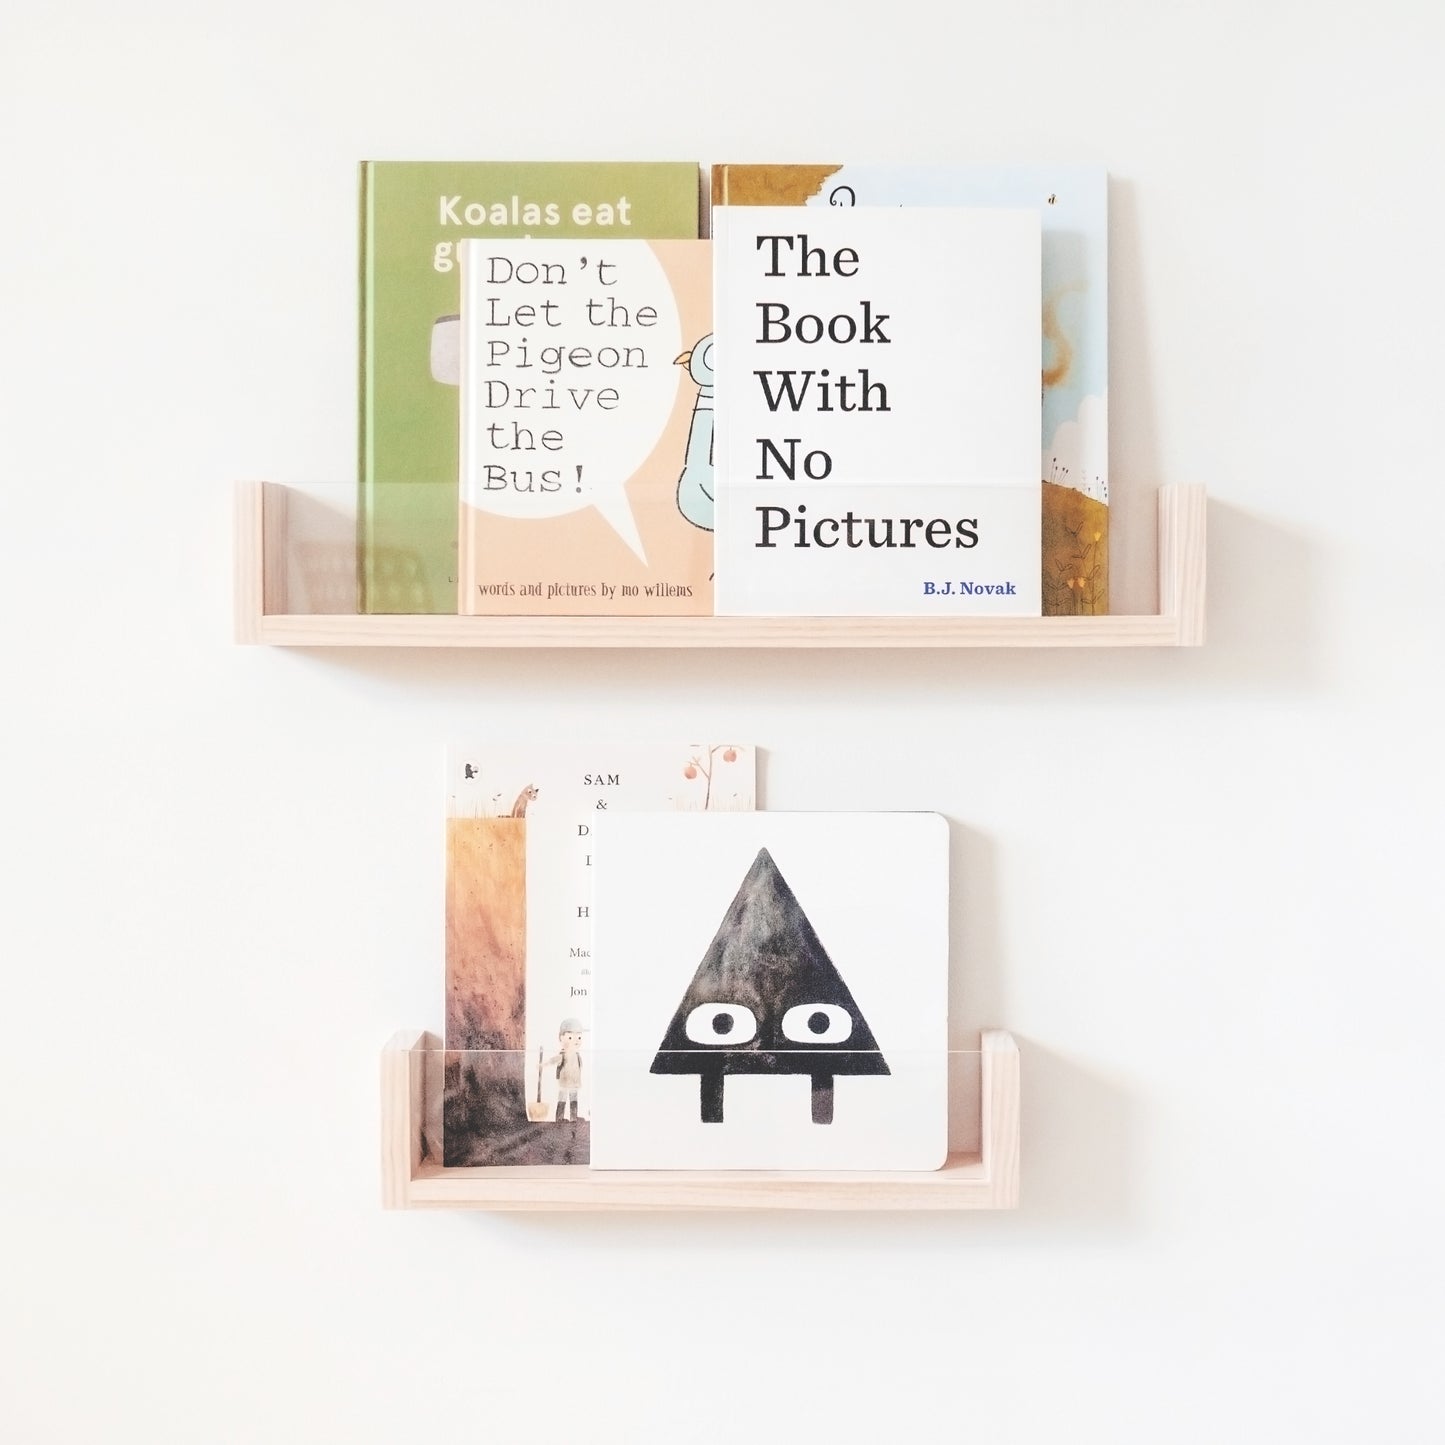 This item has a wooden shelf with clear acrylic in front. The books are stacked inside